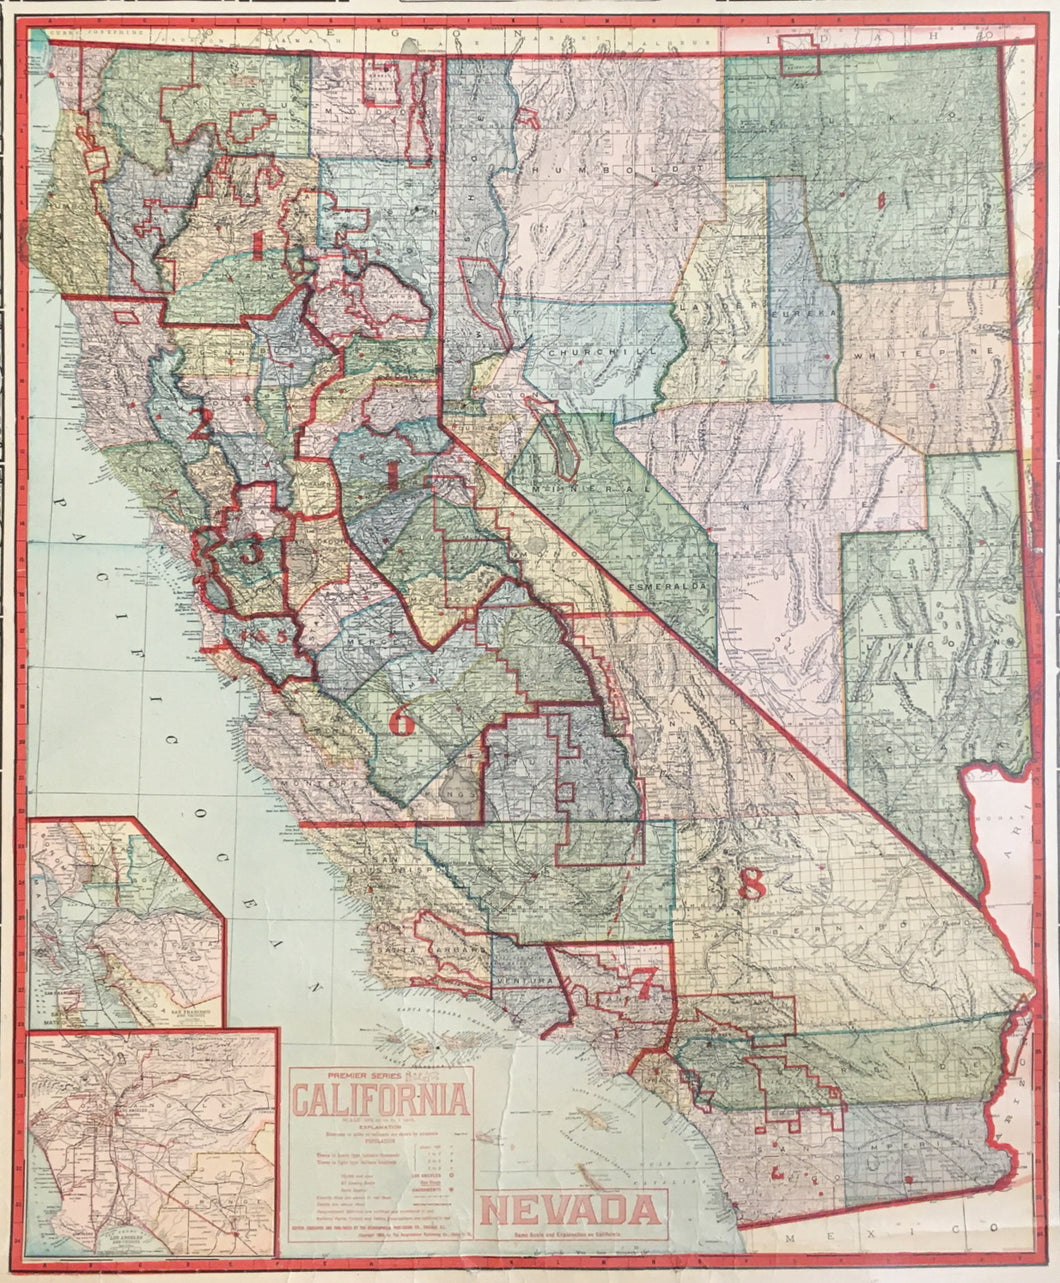 Geographical Publishing Co.  “The Santa Barbara Independent.  1910 Census Premium Map of California and Nevada.  The Big Newspaper of the Coast County.  Every Afternoon Except Sunday